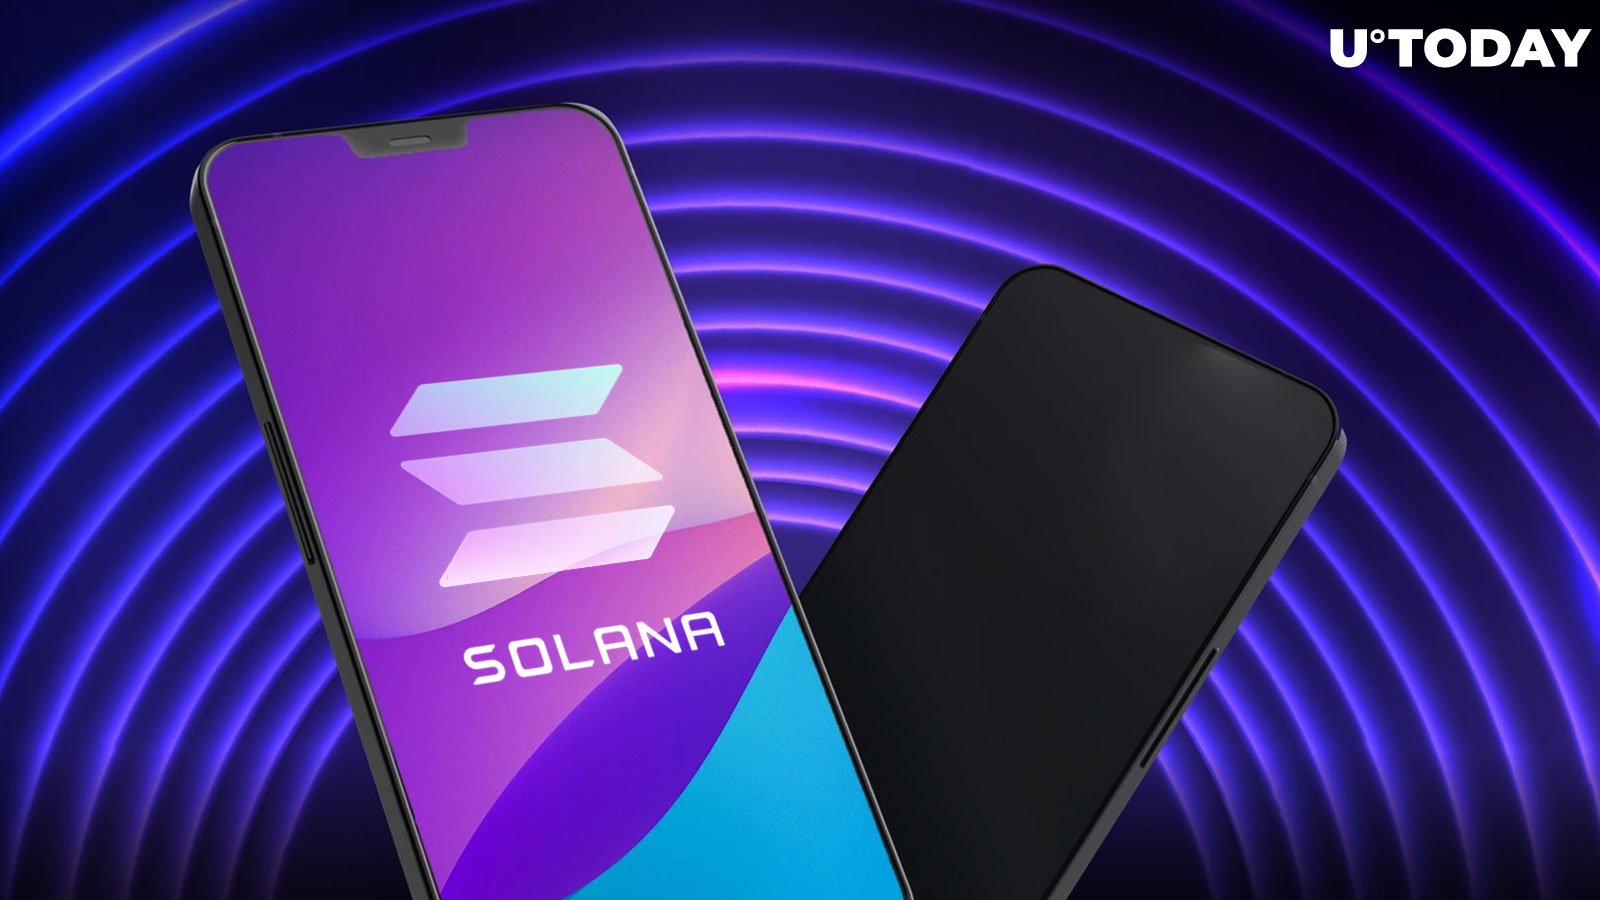 Solana's New Smartphone off to Strong Start